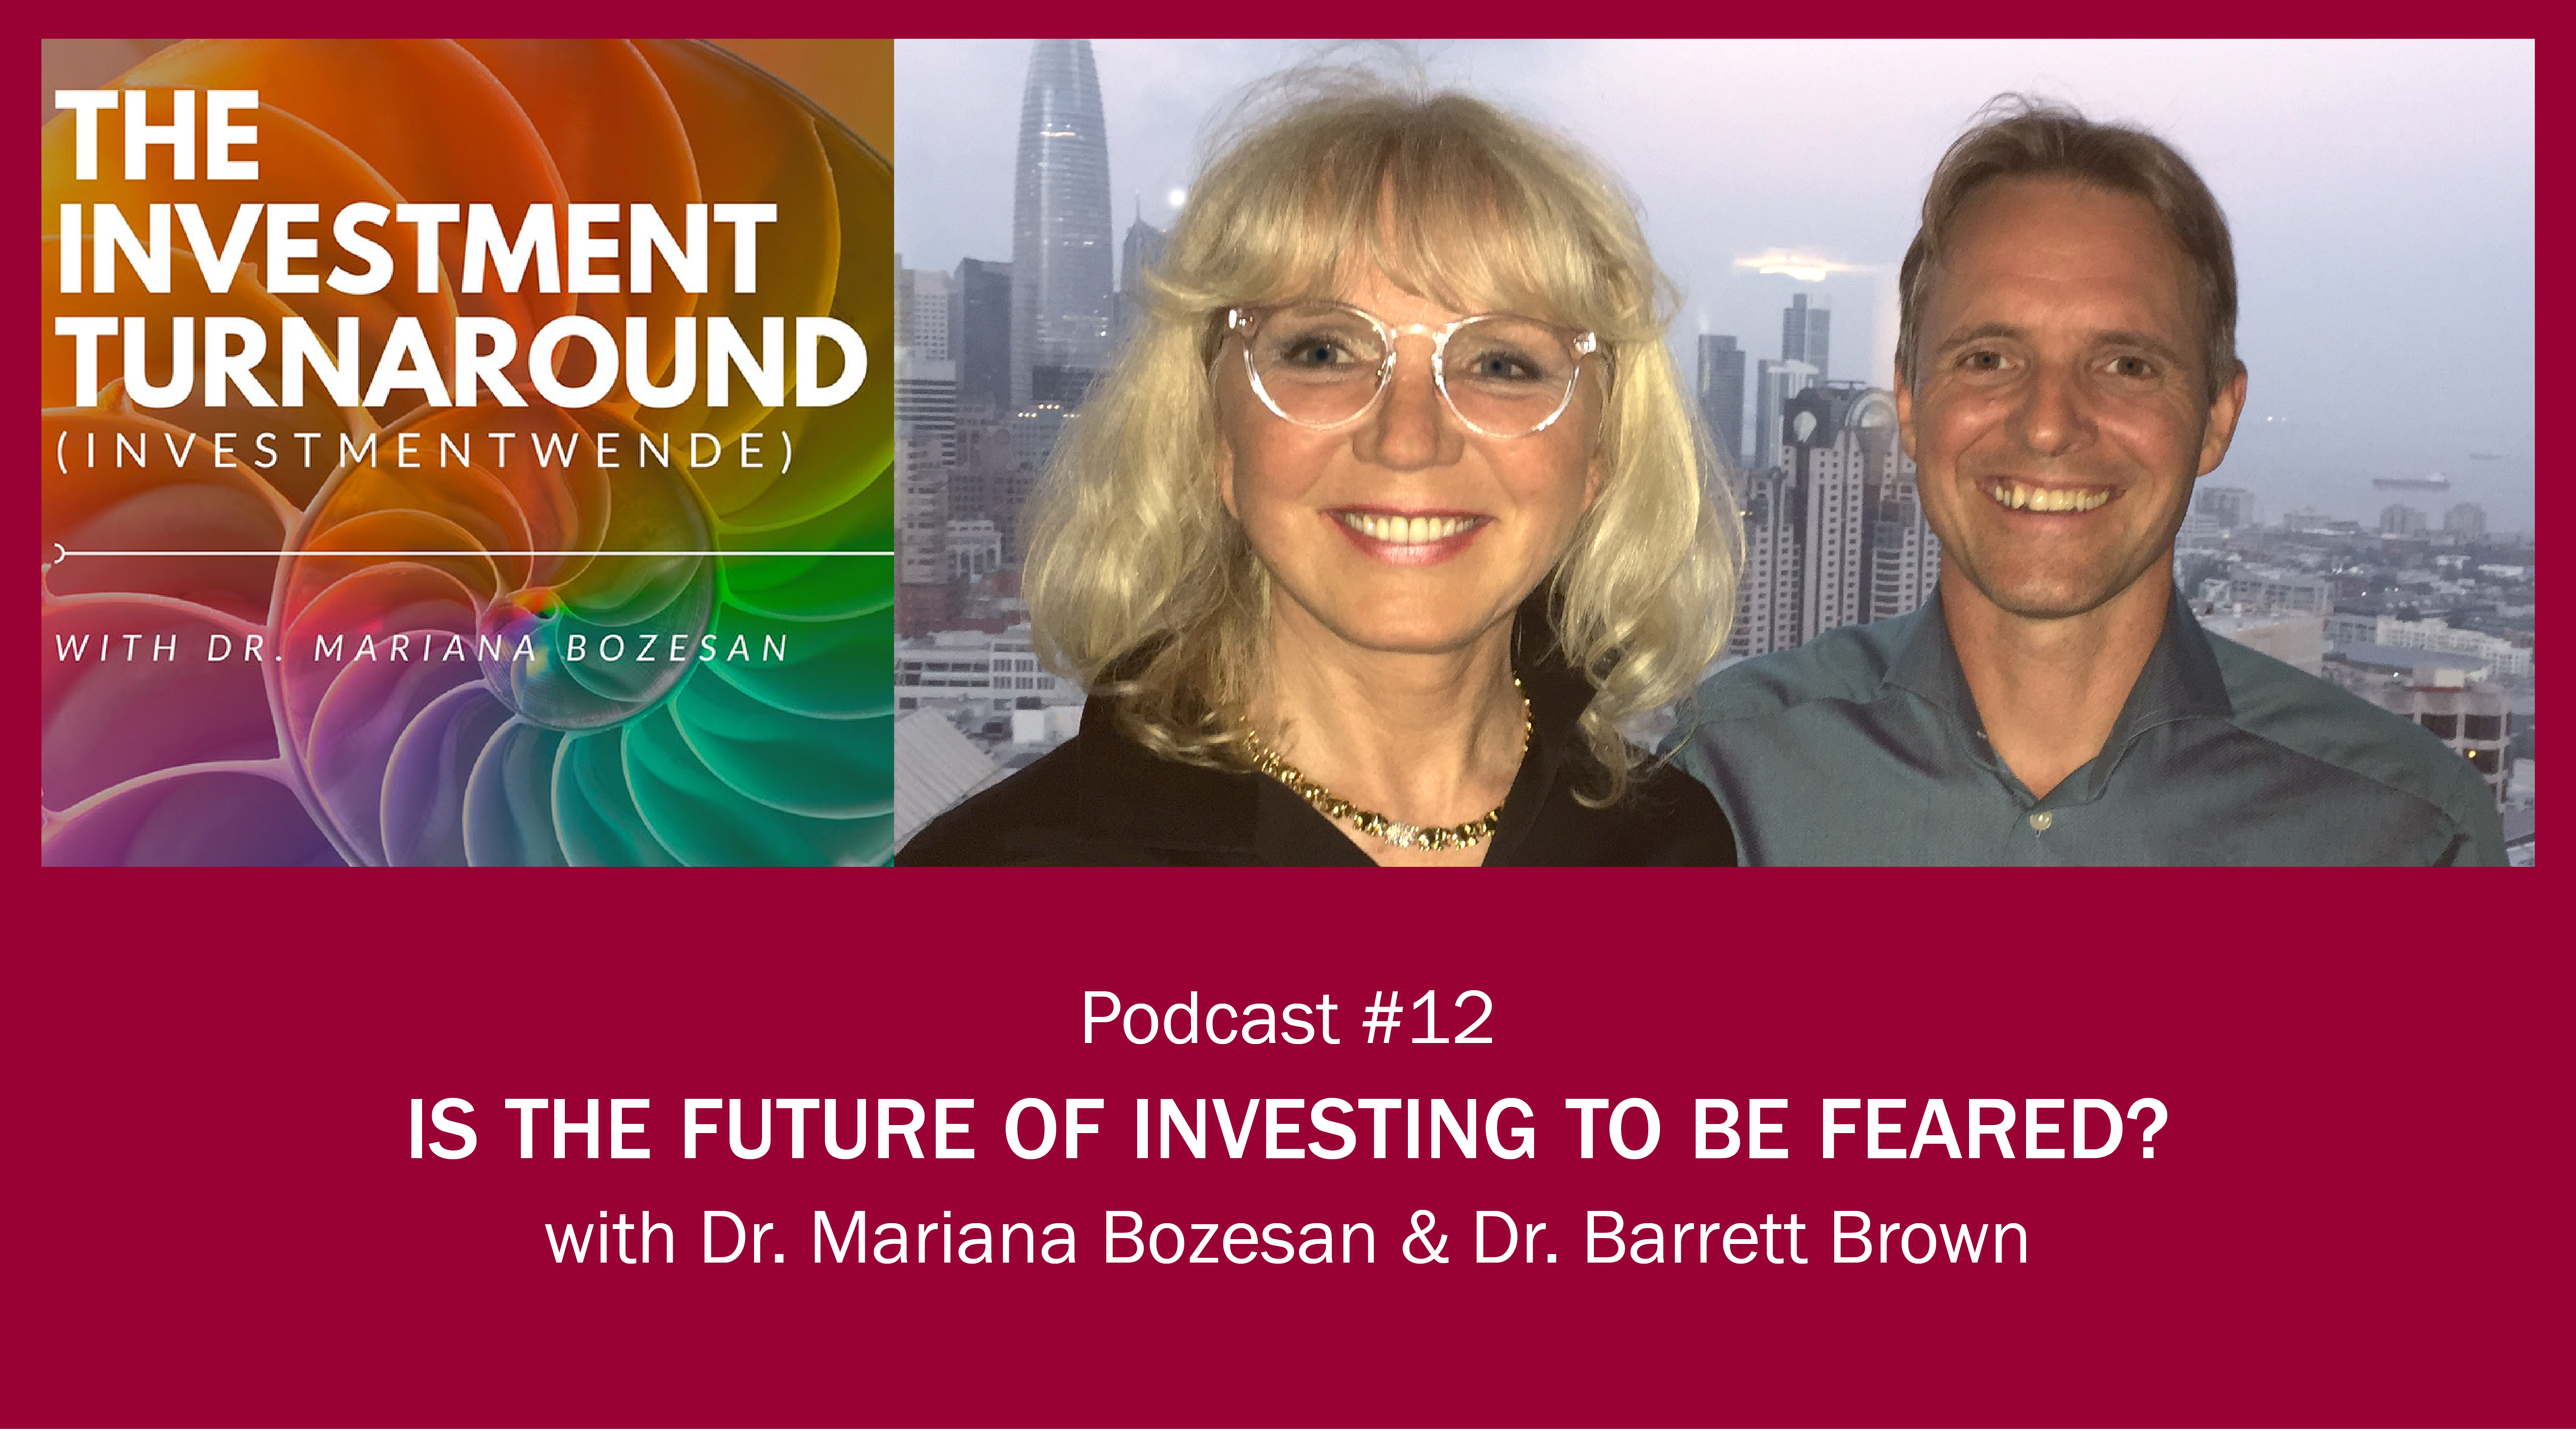 Is the future of investing to be feared?